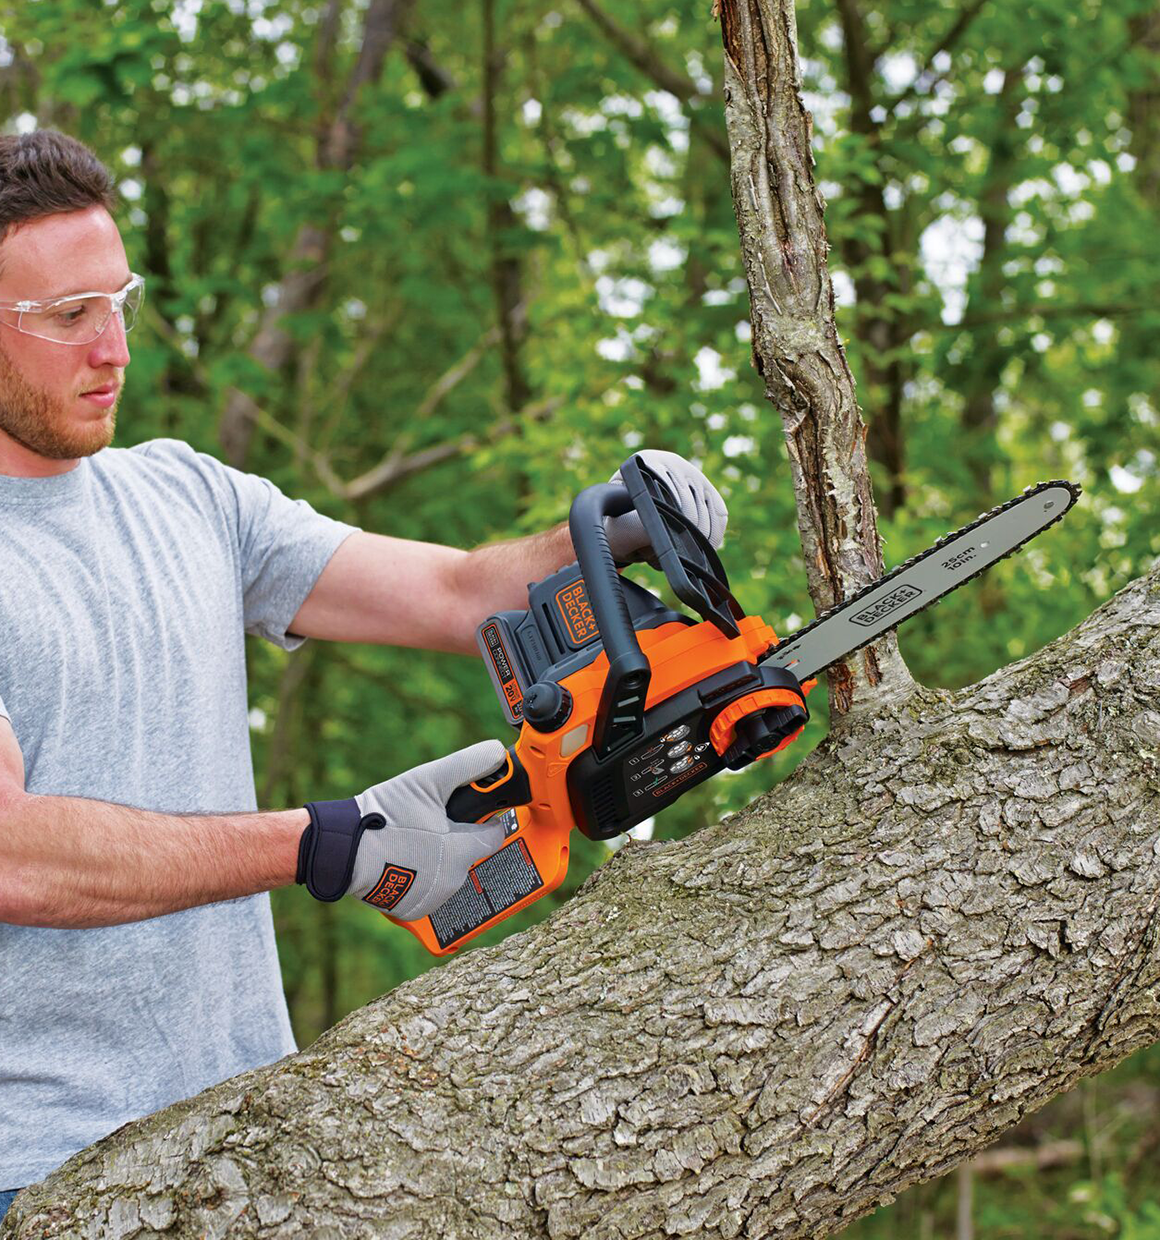 BLACK+DECKER 20V Max Cordless Chainsaw 10-Inch Review Unboxing 